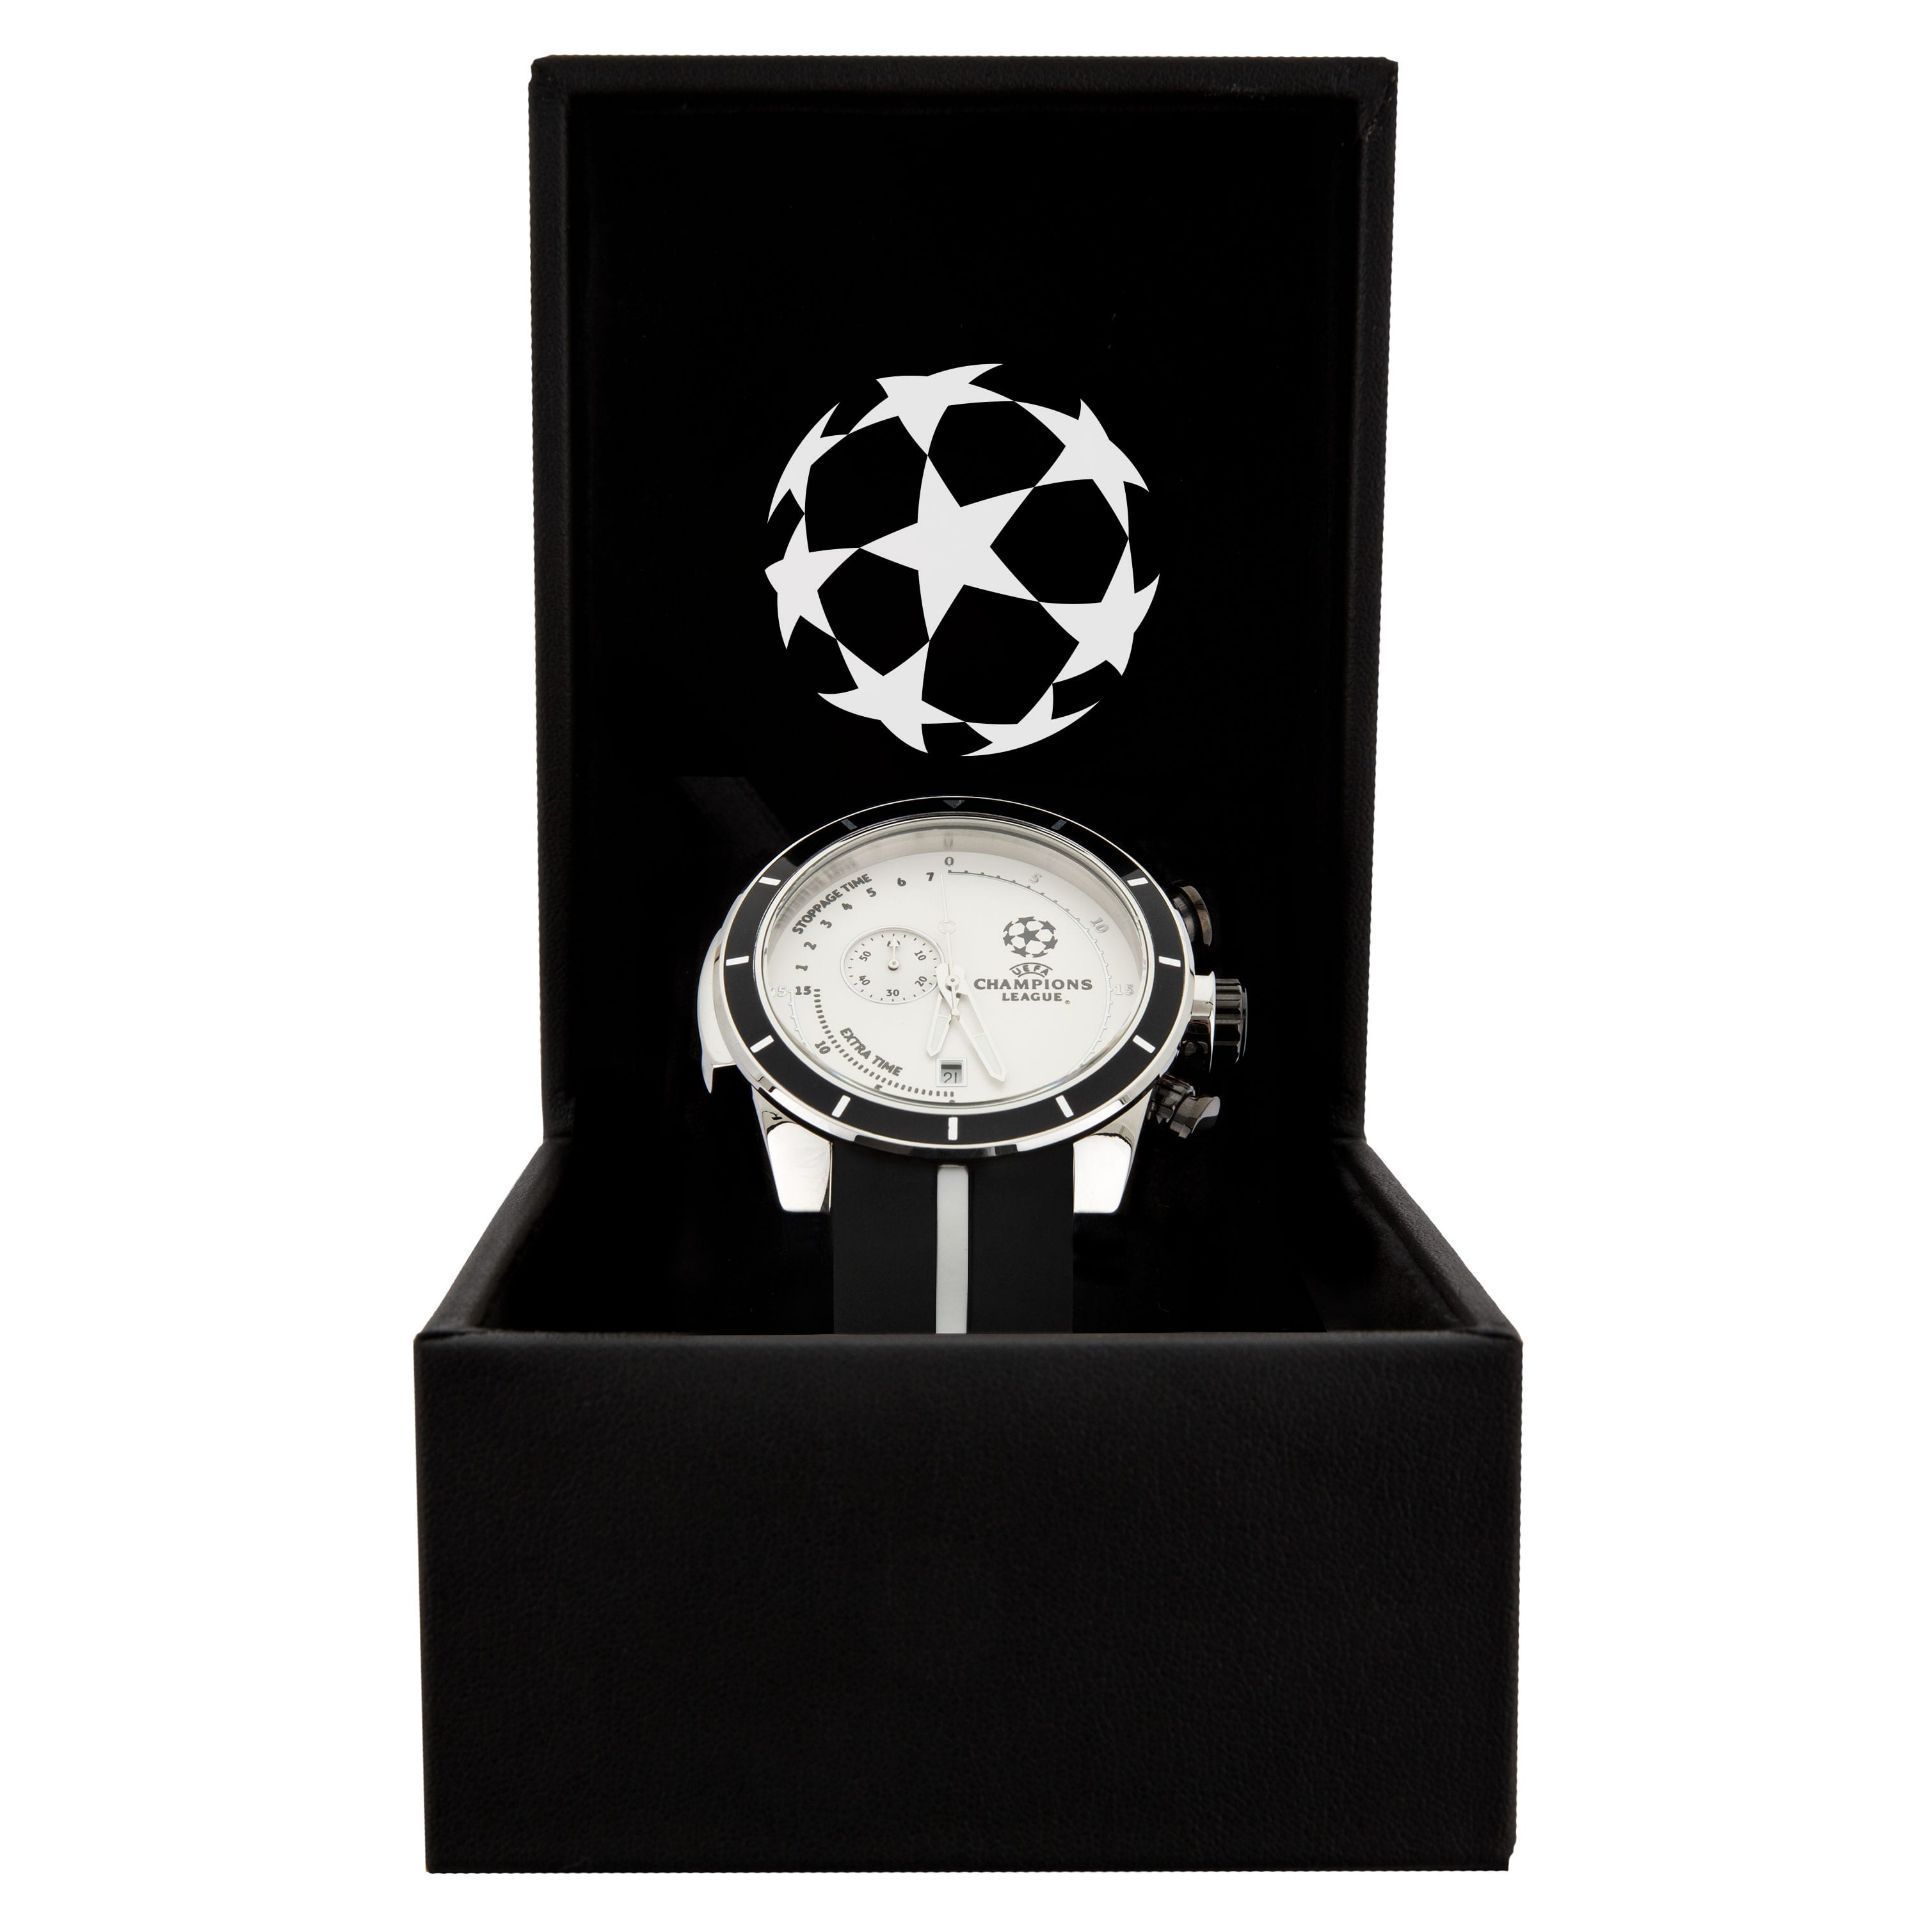 BRAND NEW OFFICIAL UEFA CHAMPIONS LEAGUE 45 MINUTE COUNTDOWN WATCH CL45-STB-GRBLP, RRP £225 - Image 4 of 5